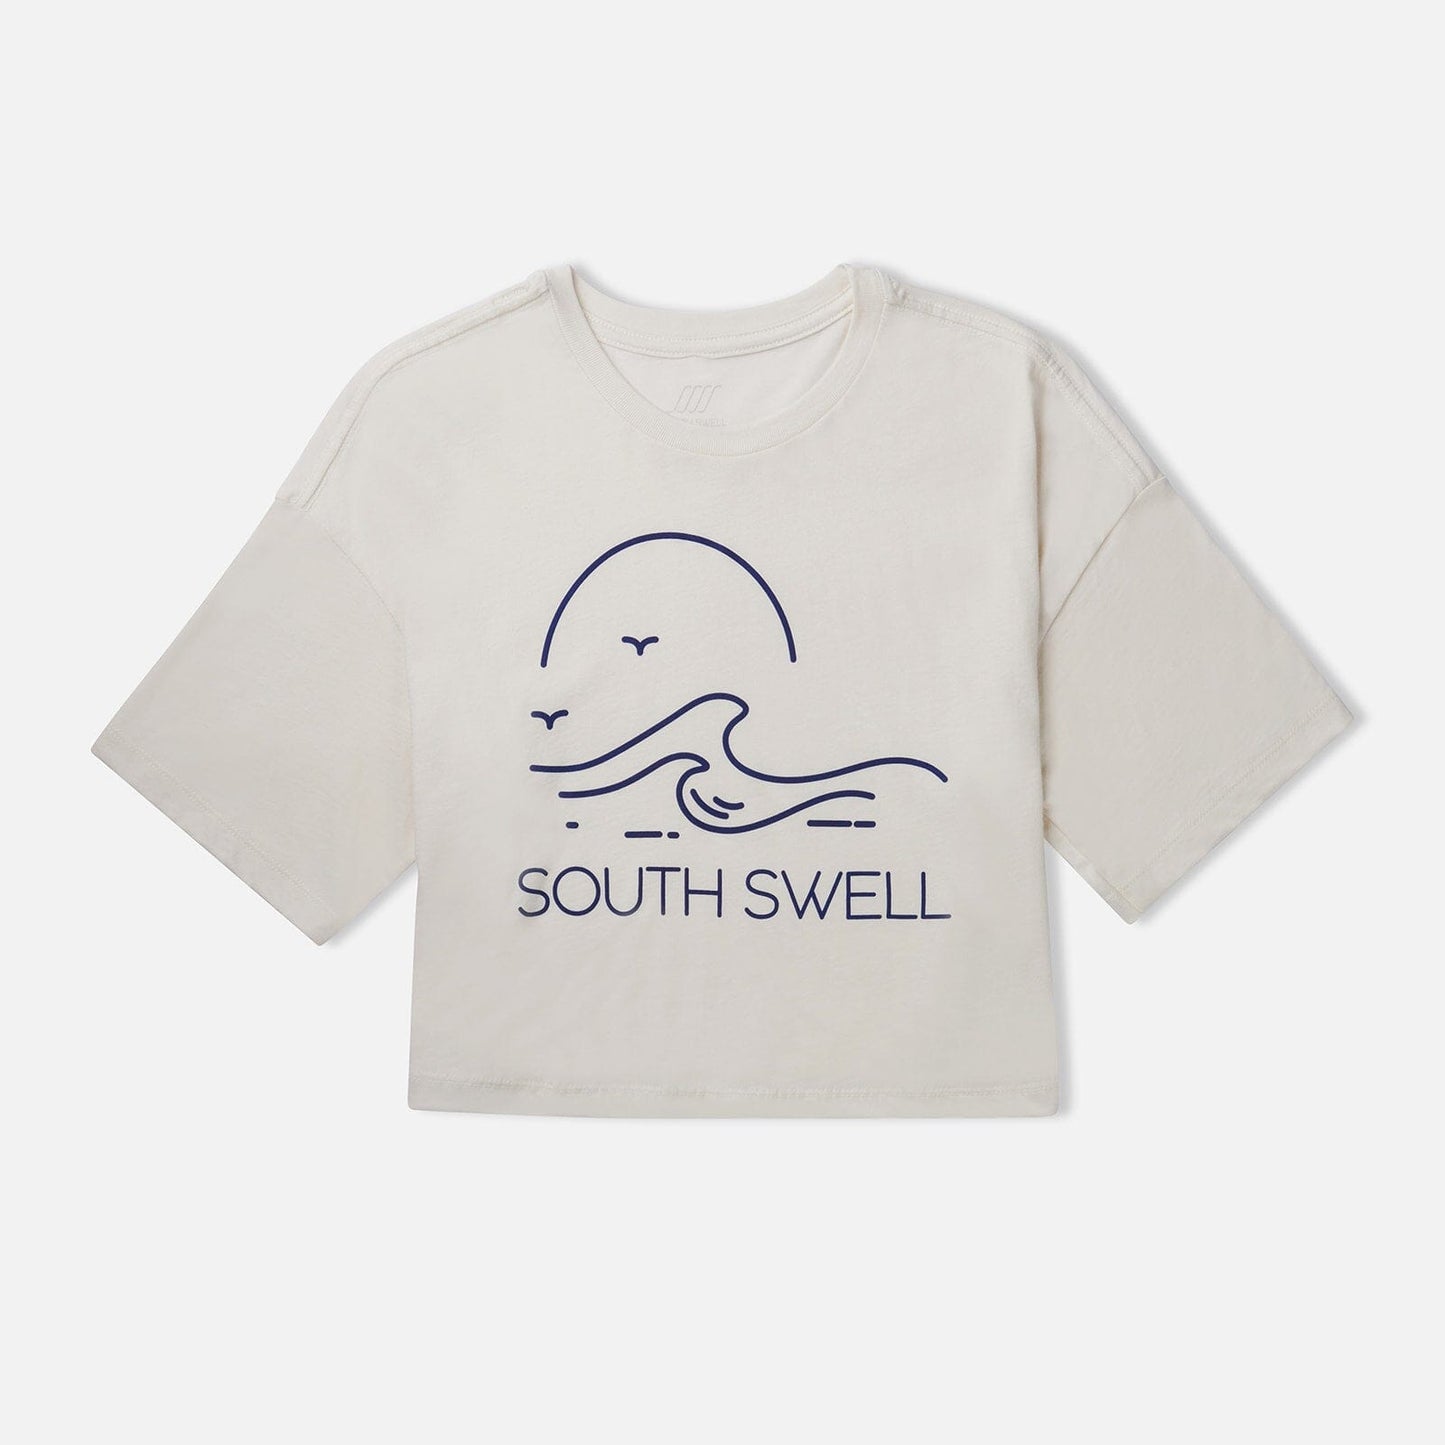 SOUTH SWELL Simple Wave Crop Tee W Tees SOUTH SWELL S Vintage White 